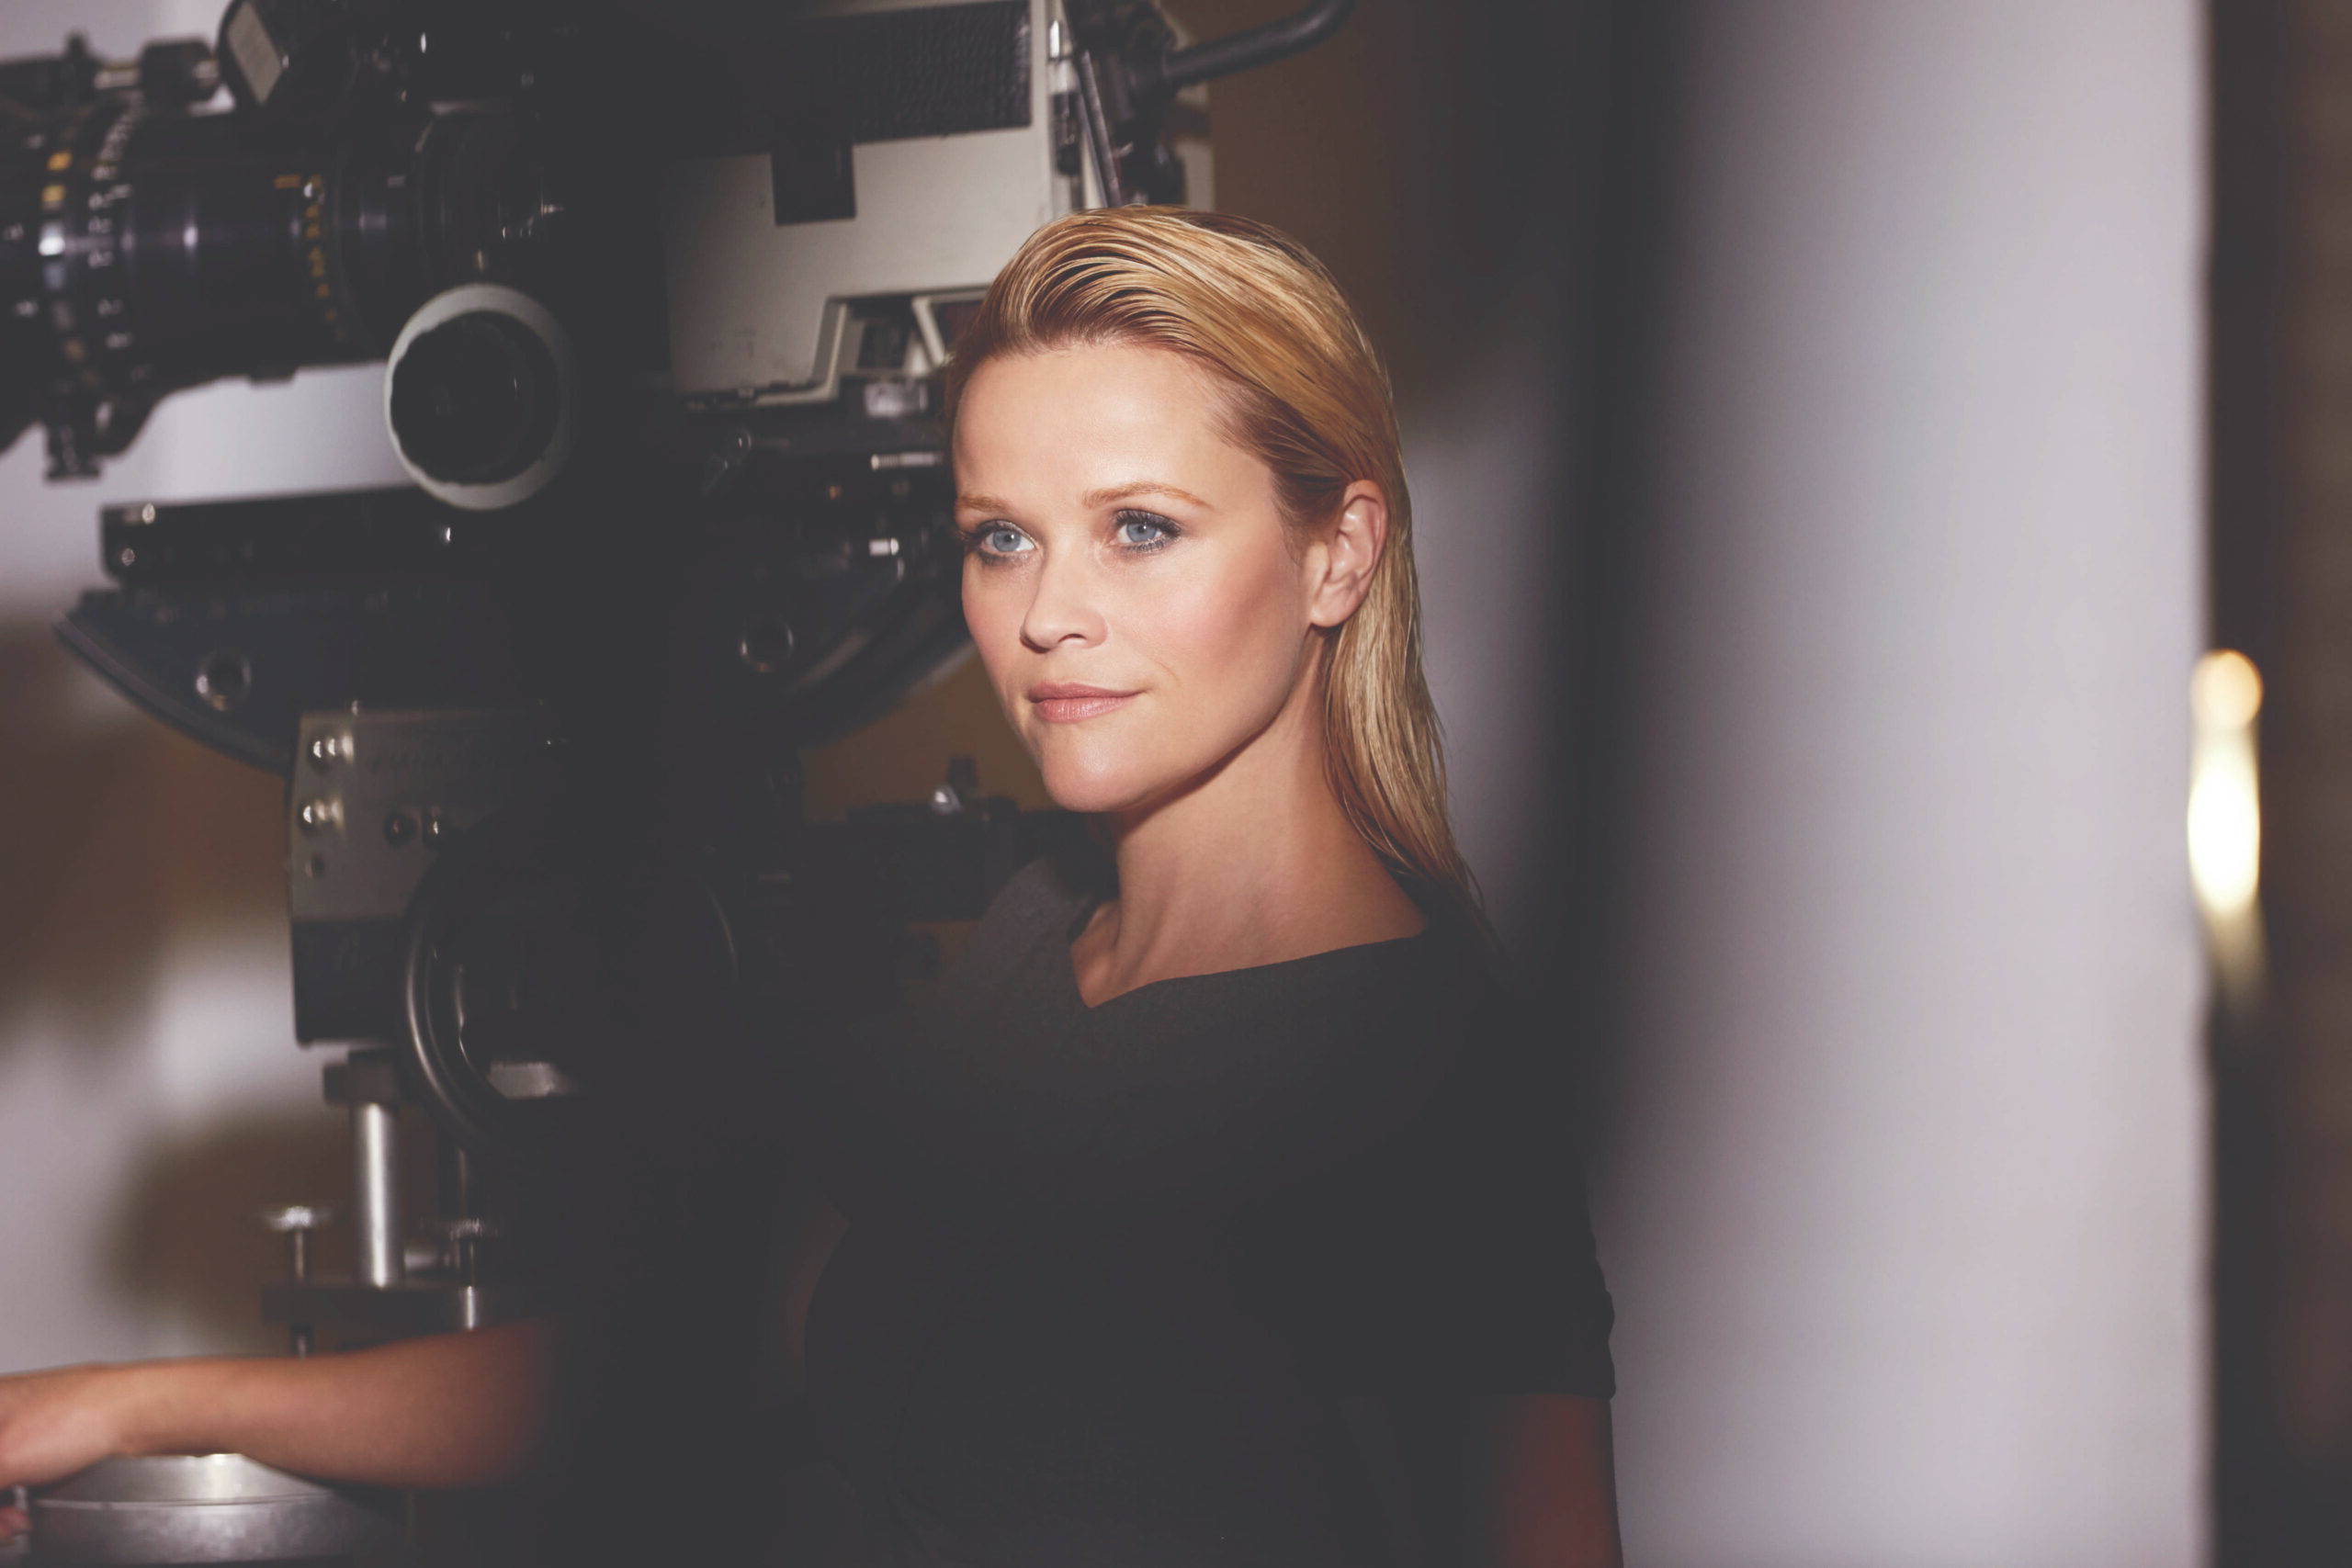 Reece Witherspoon has a new role as Elizabeth Arden’s Storyteller-in-Chief 